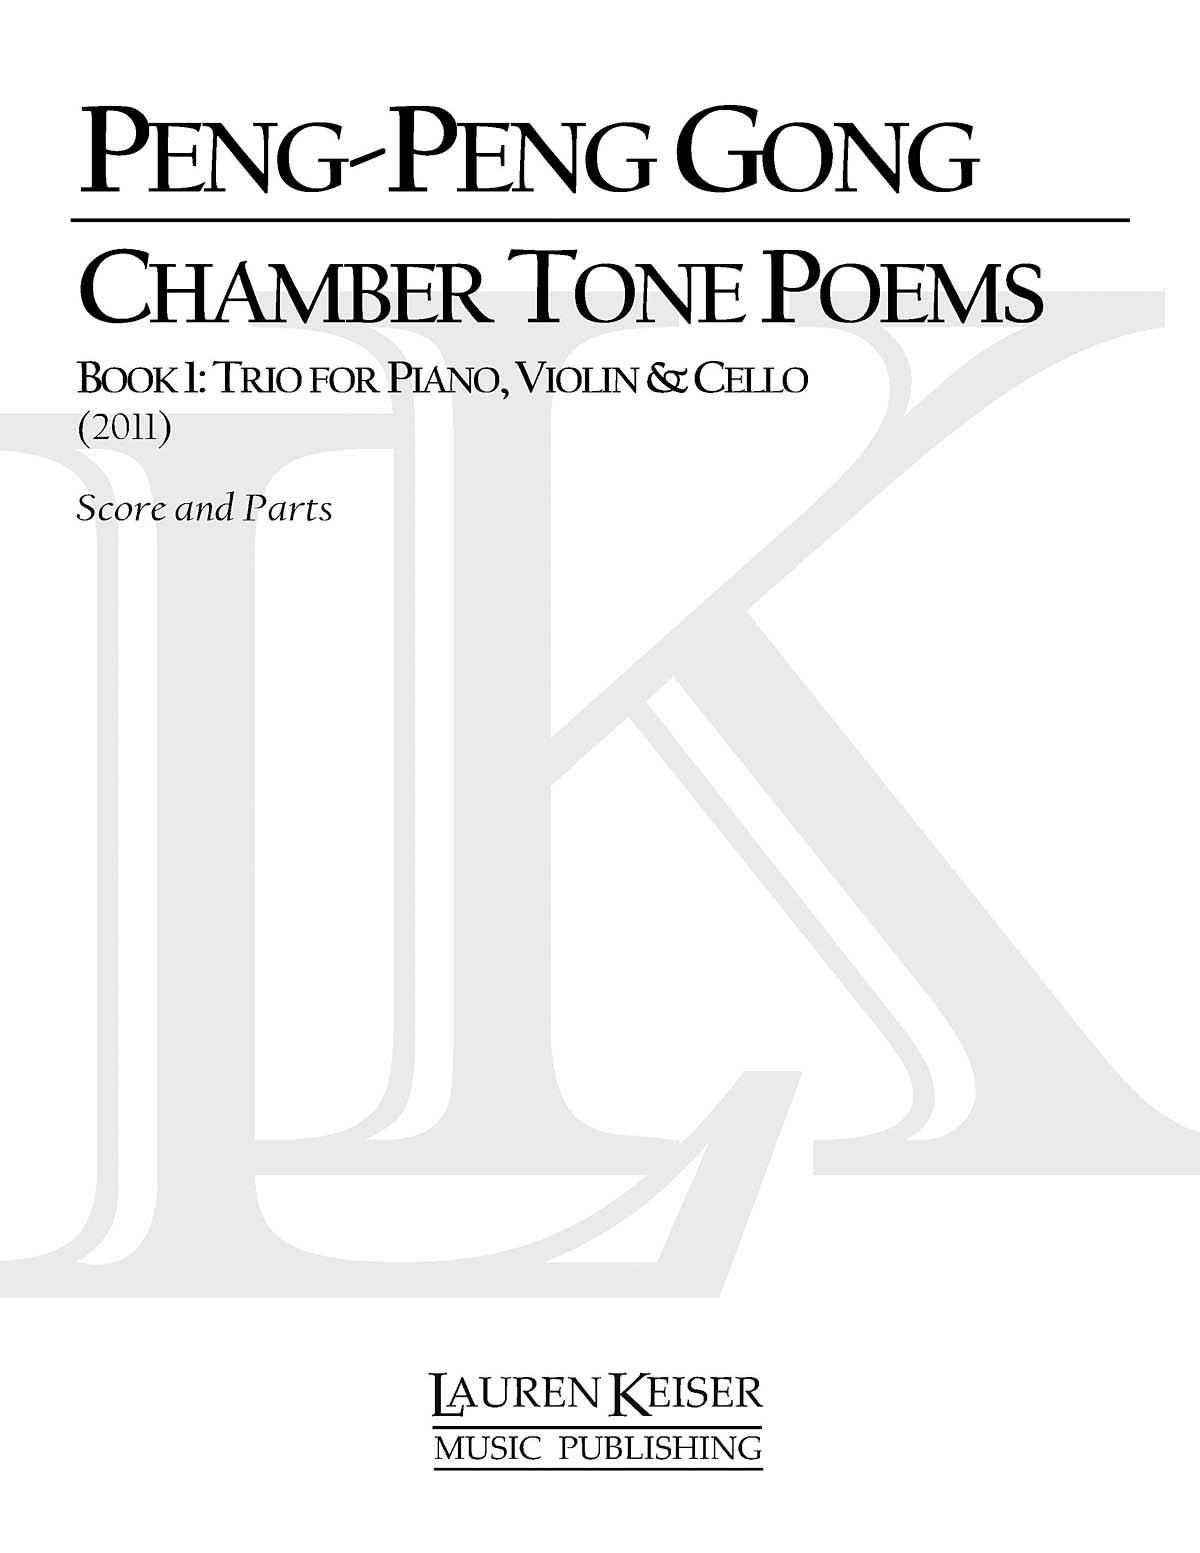 Peng-Peng Gong: Chamber Tone Poems  Book 1: Trio for Piano and Str: Chamber